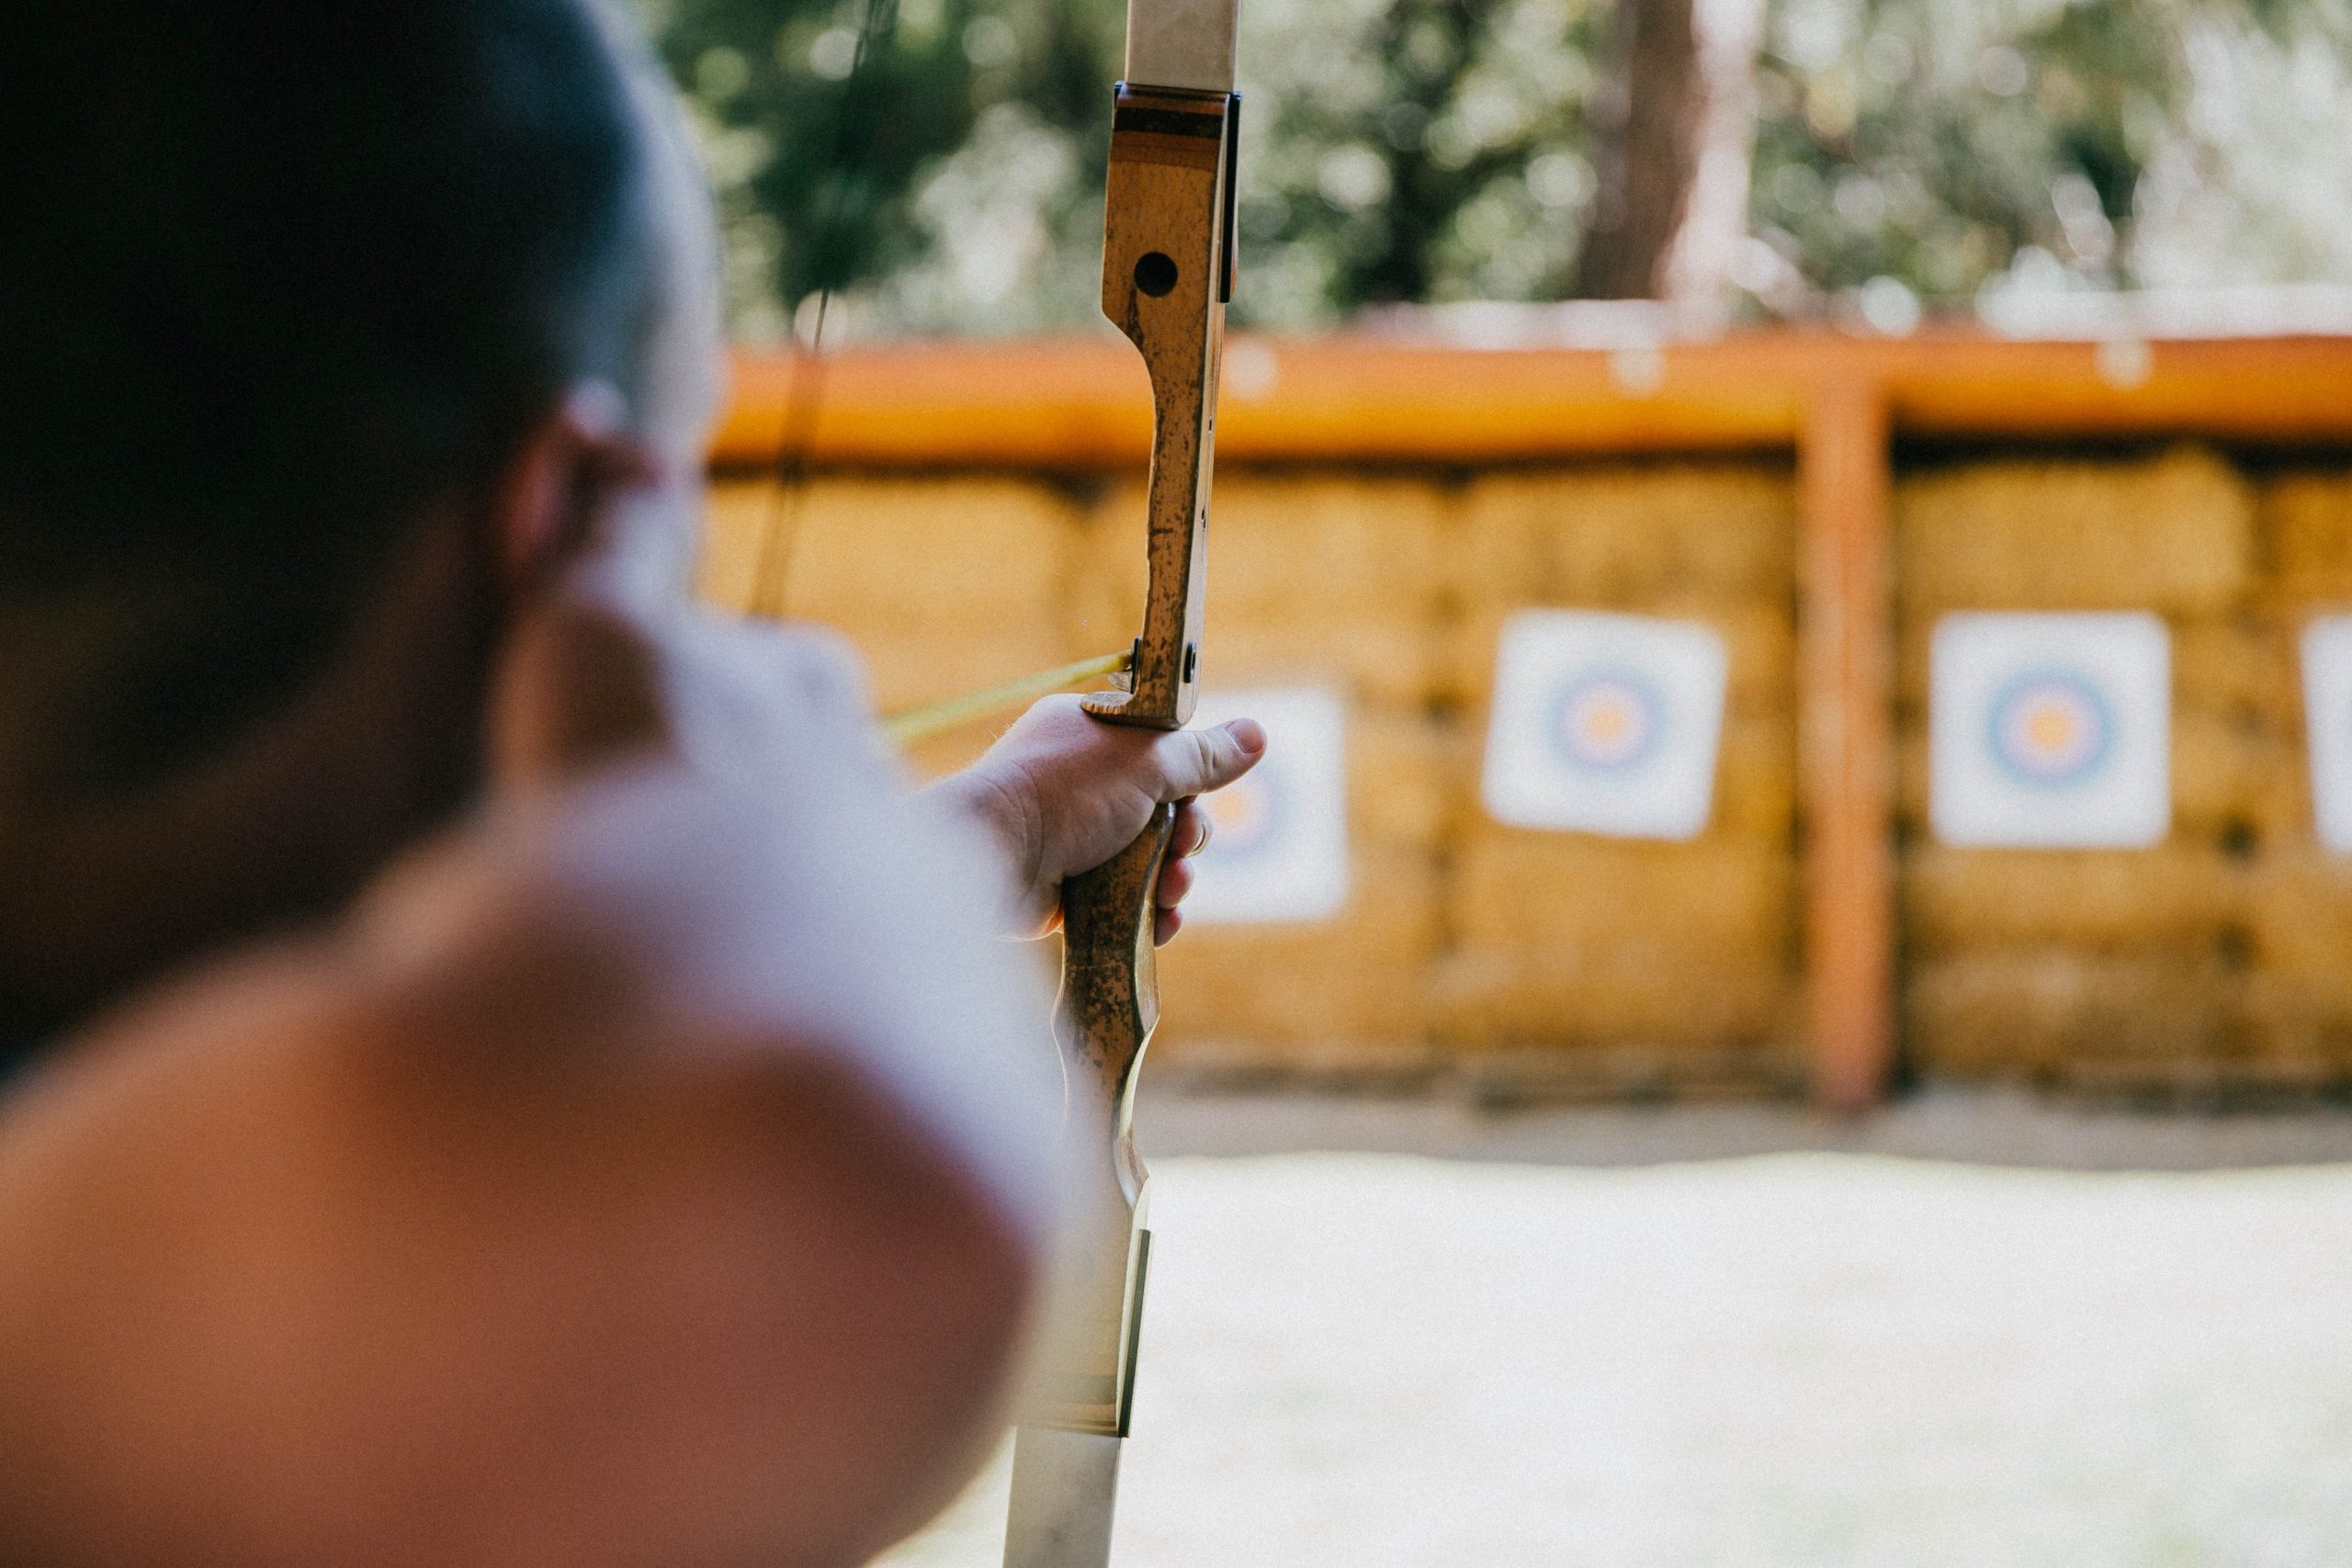 Man with bow taking aim at an archery target.